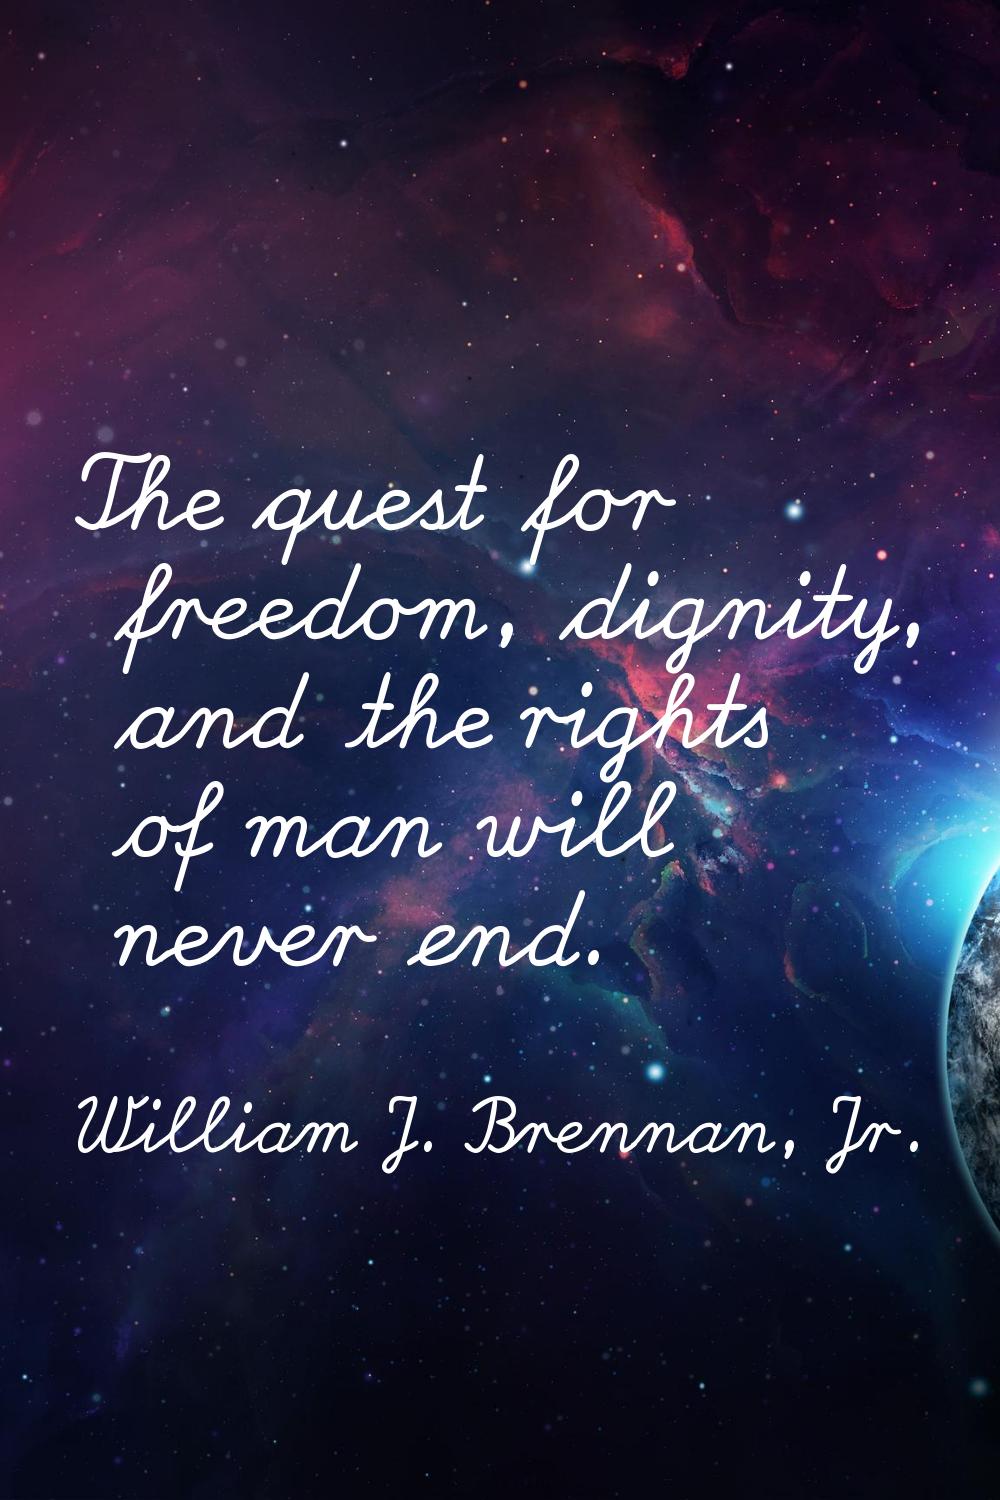 The quest for freedom, dignity, and the rights of man will never end.